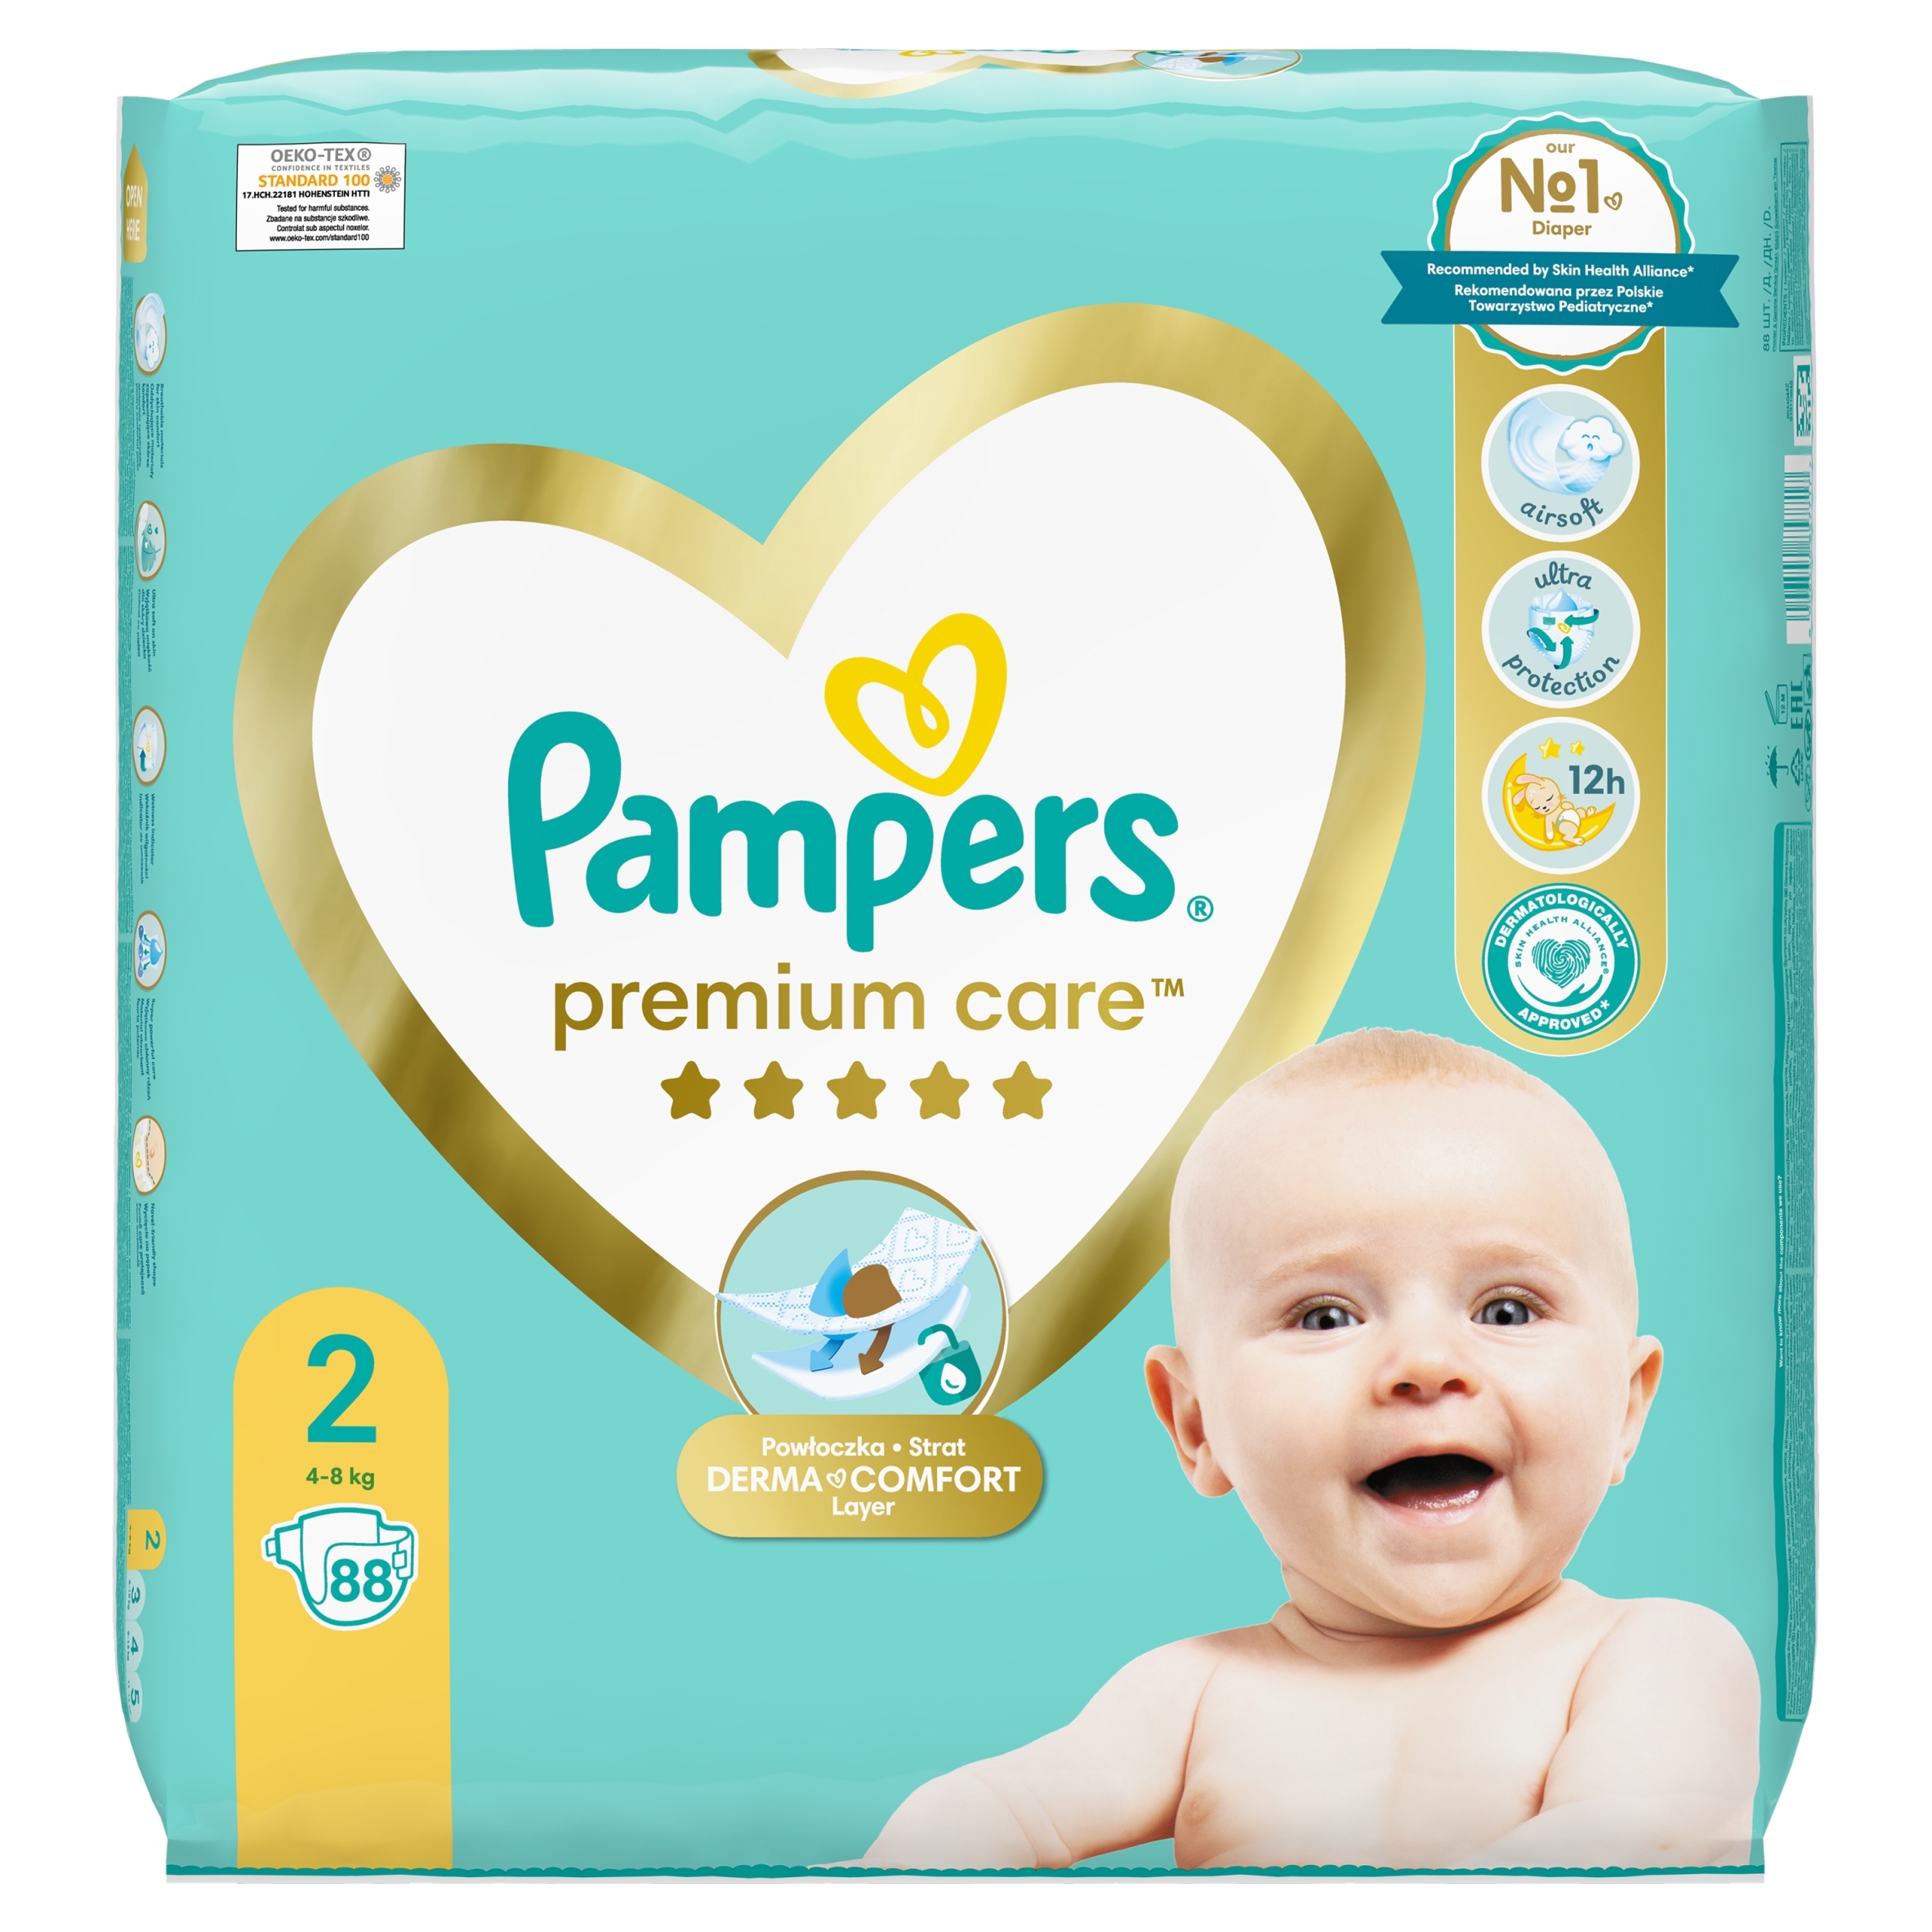 wish pampers